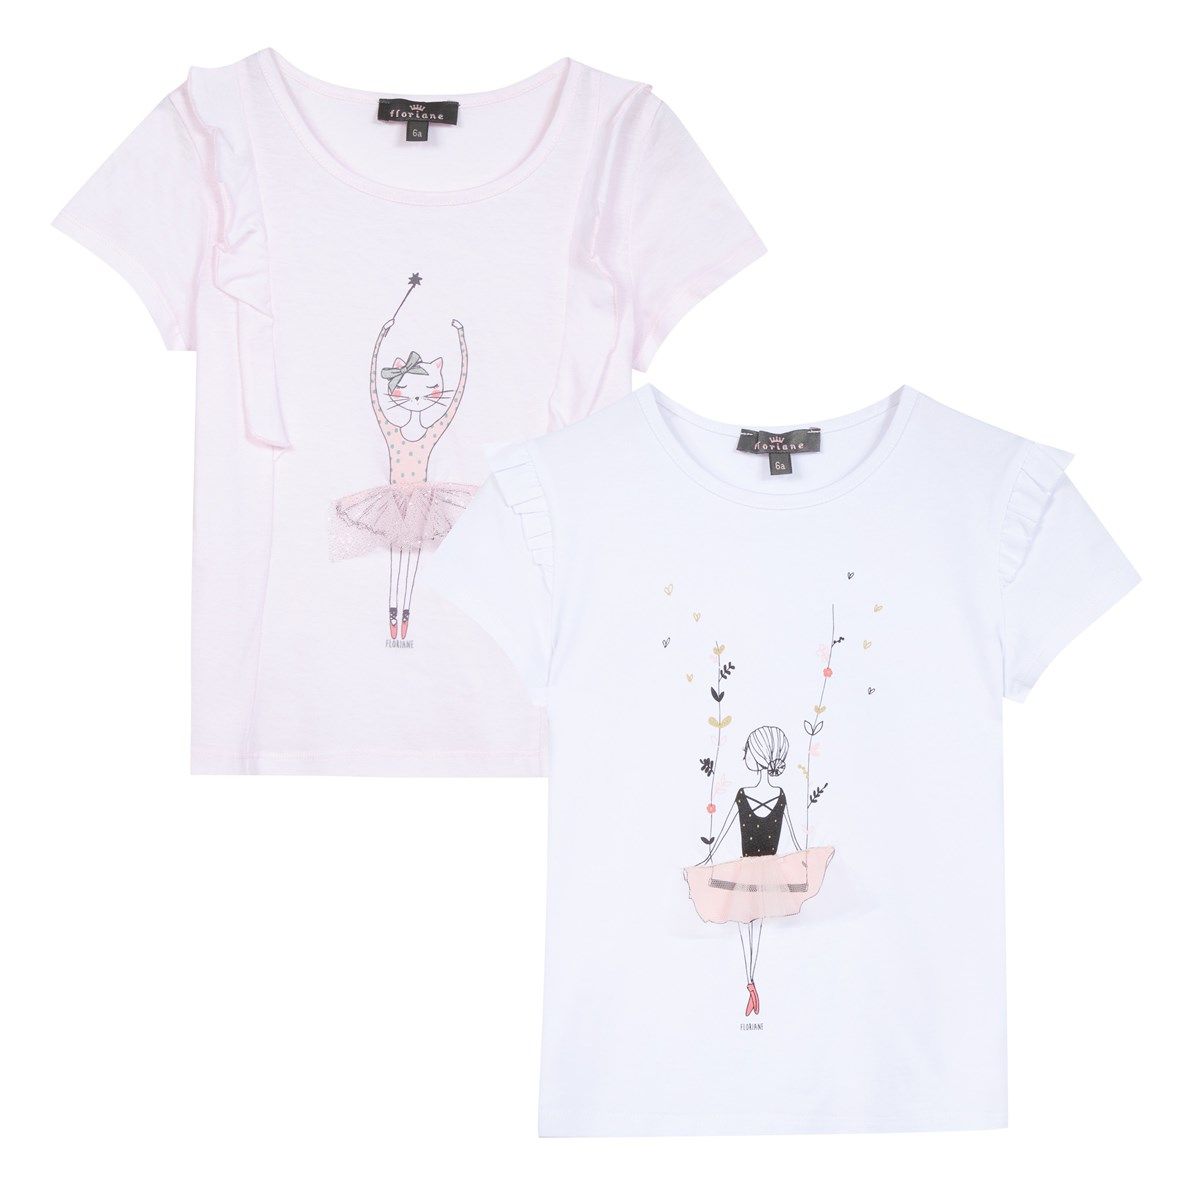 TEE-SHIRT MANCHES COURTES La Redoute Fille Vêtements Tops & T-shirts T-shirts Manches courtes 